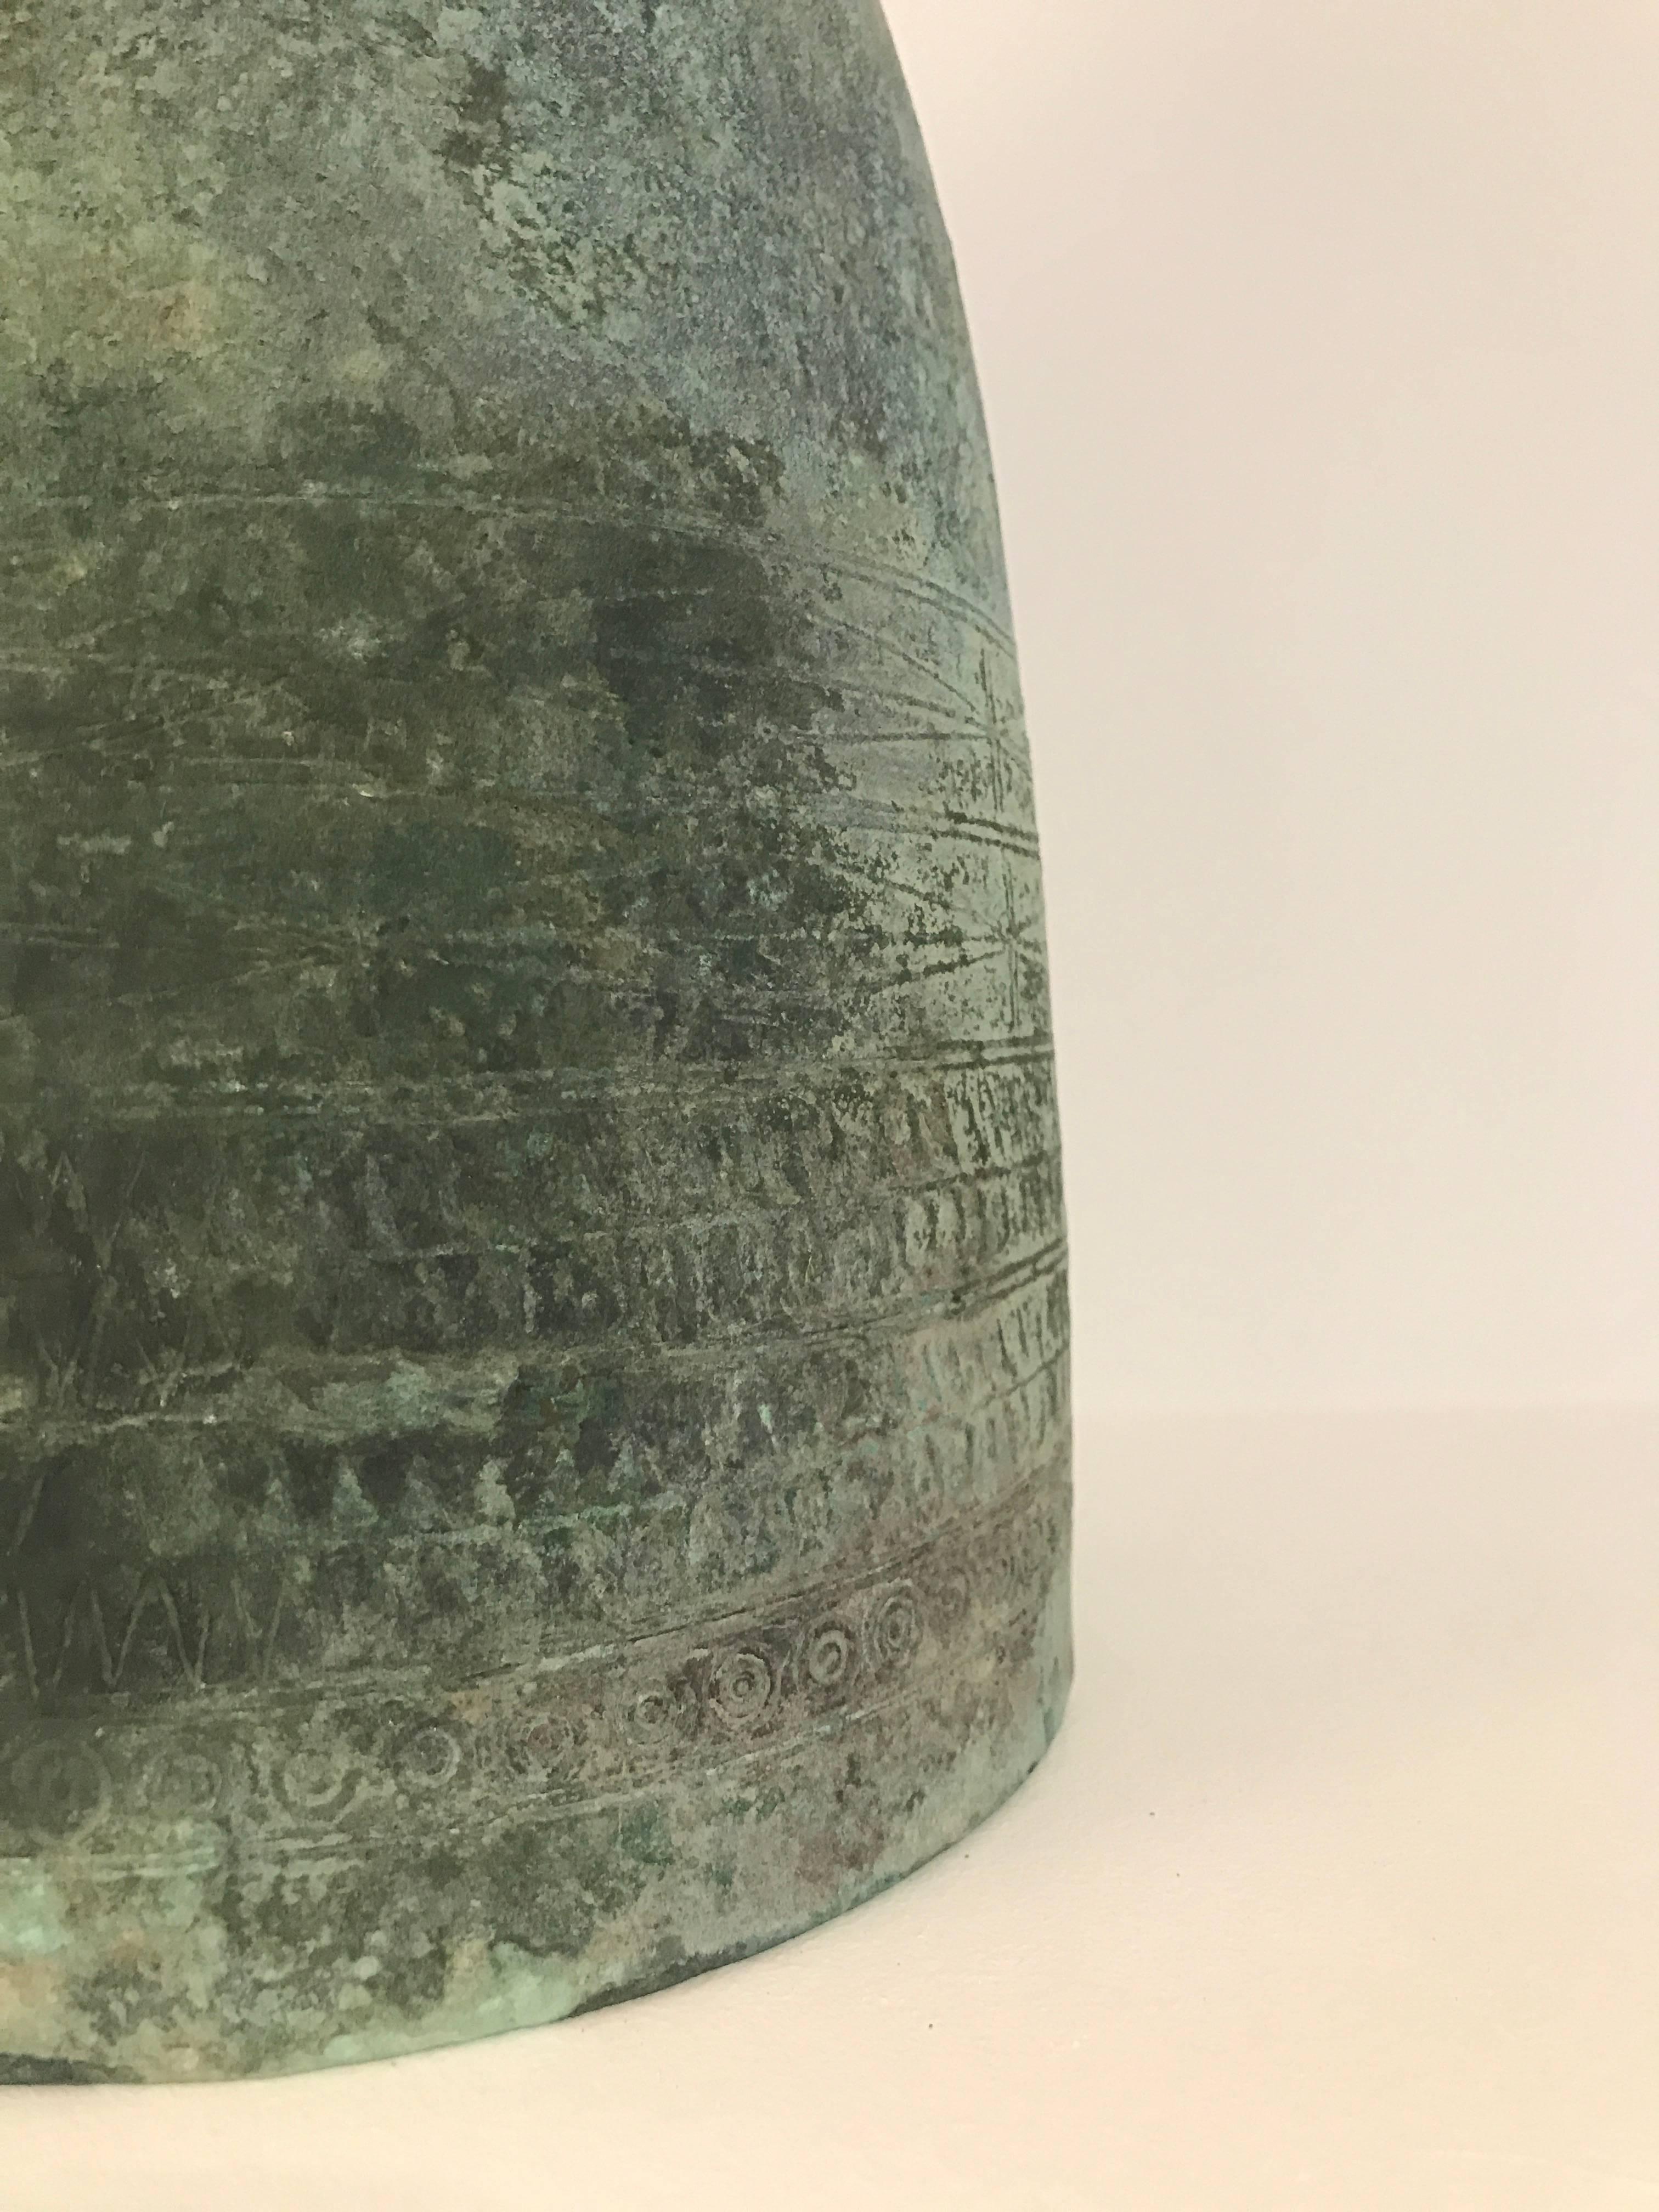 Large bronze bell with geometric decorations
South East Asia
Beautiful green patina.